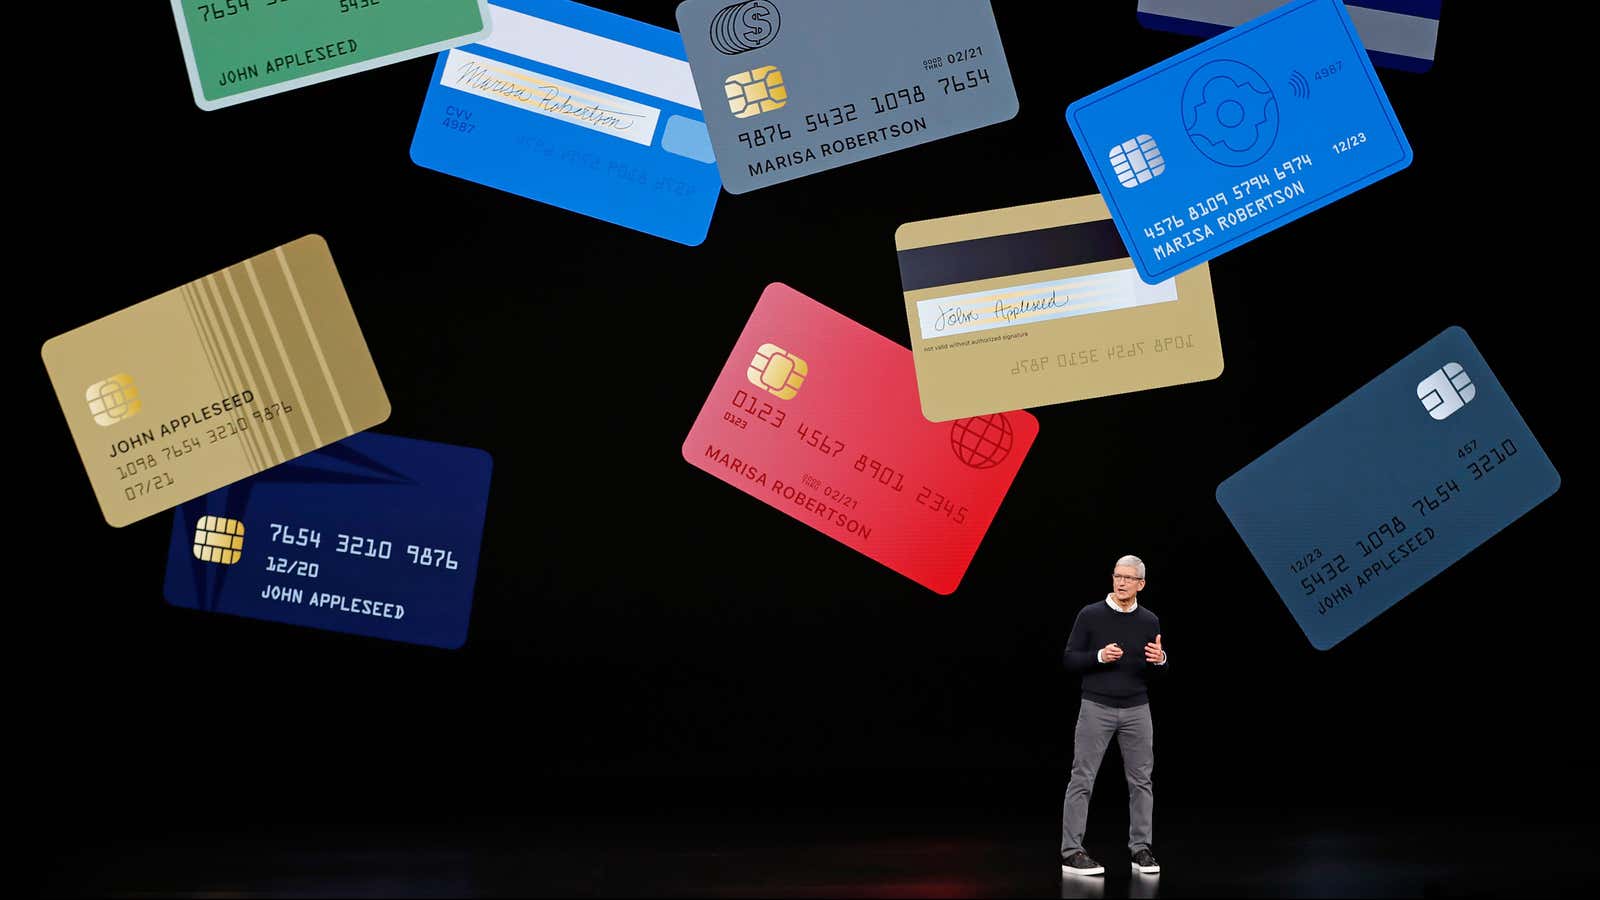 Tim Cook may have this many credit cards himself.